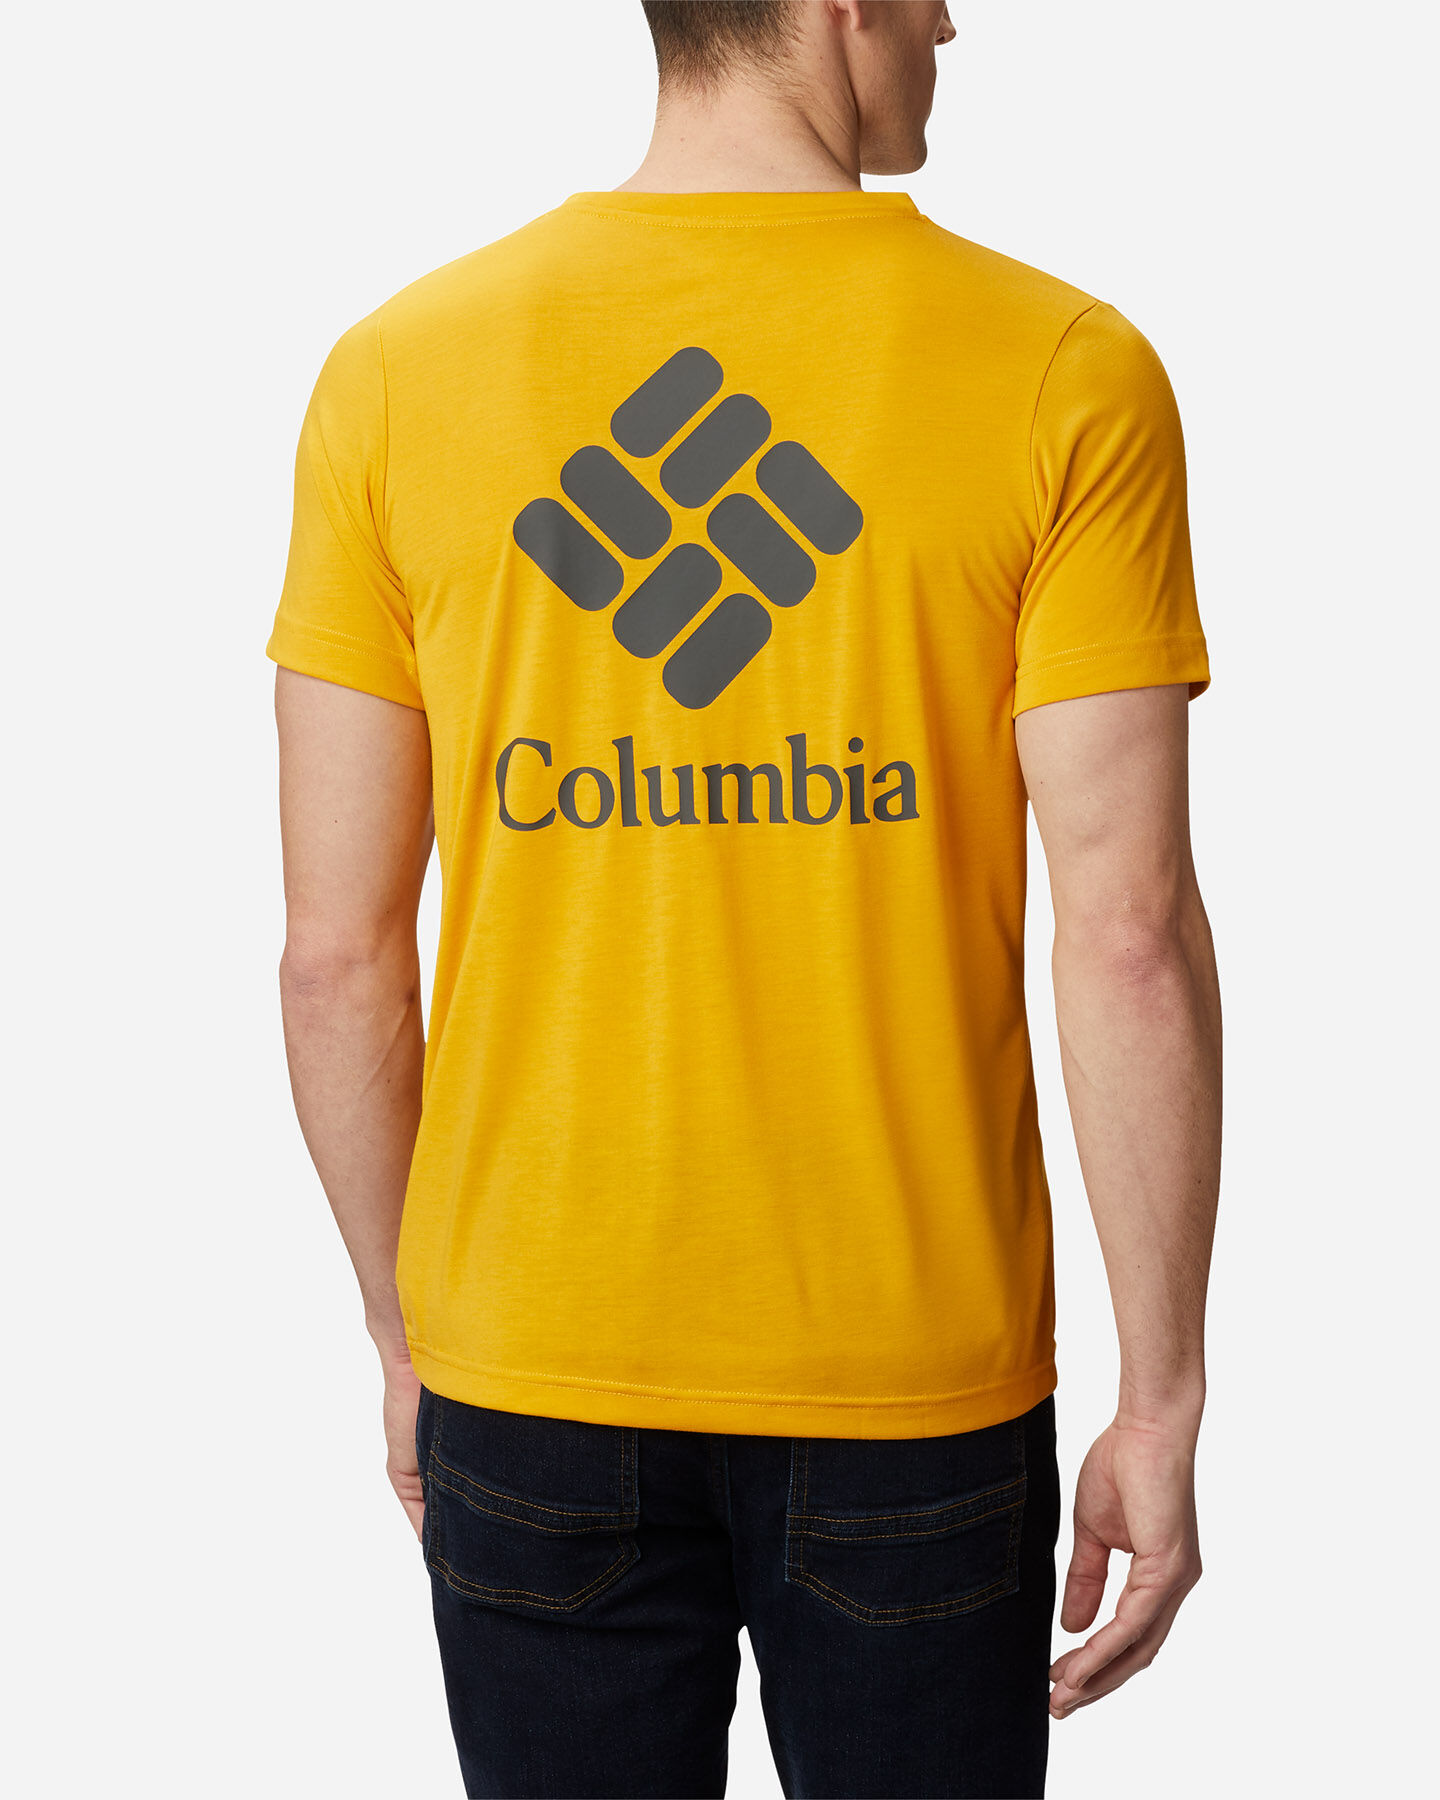  T-Shirt COLUMBIA MAXTRAIL LOGO M S5174869|790|S scatto 3